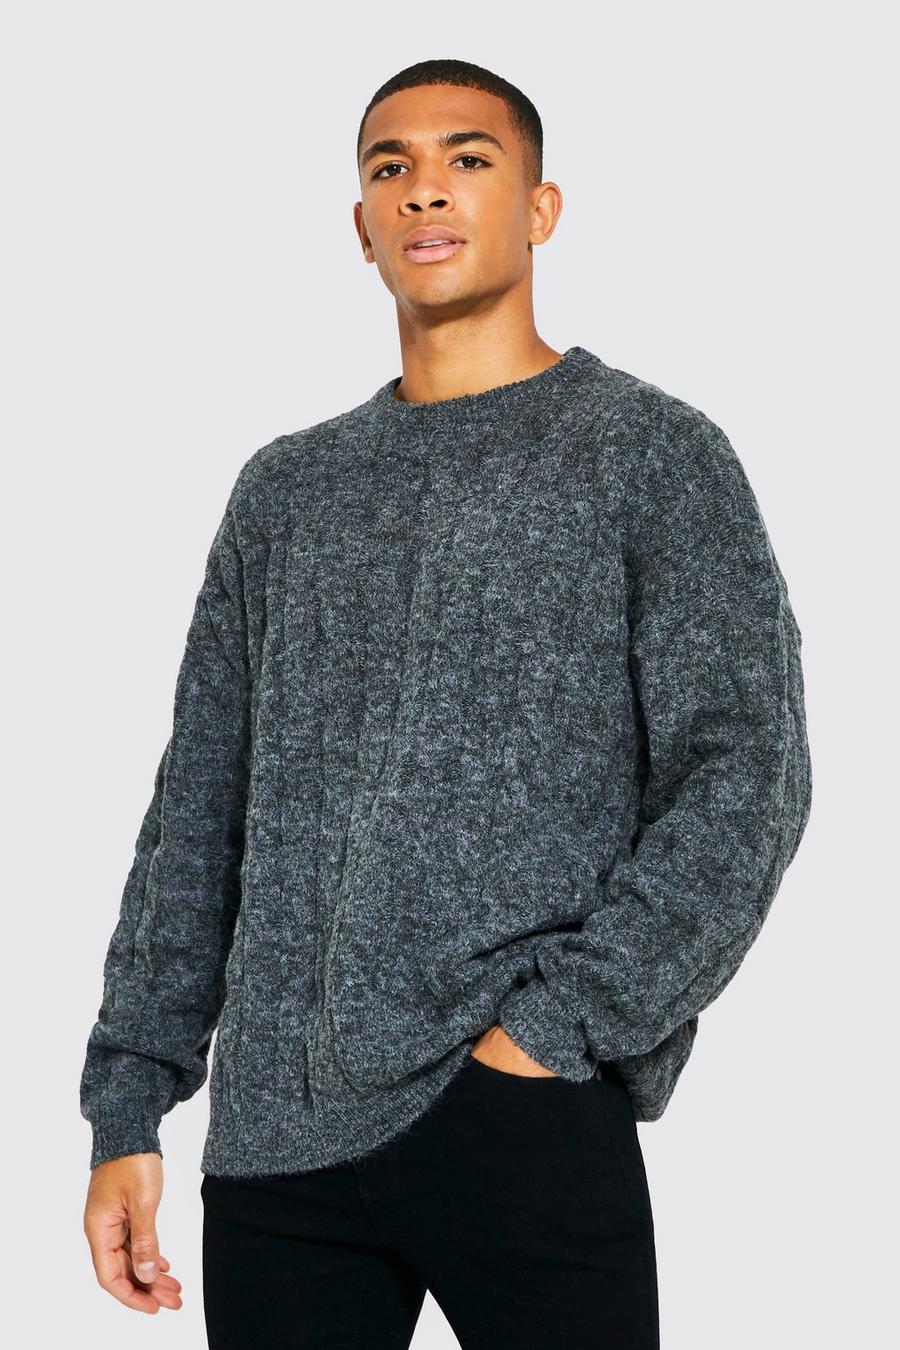 Charcoal grey Oversized Cable Brushed Yarn Knitted Jumper